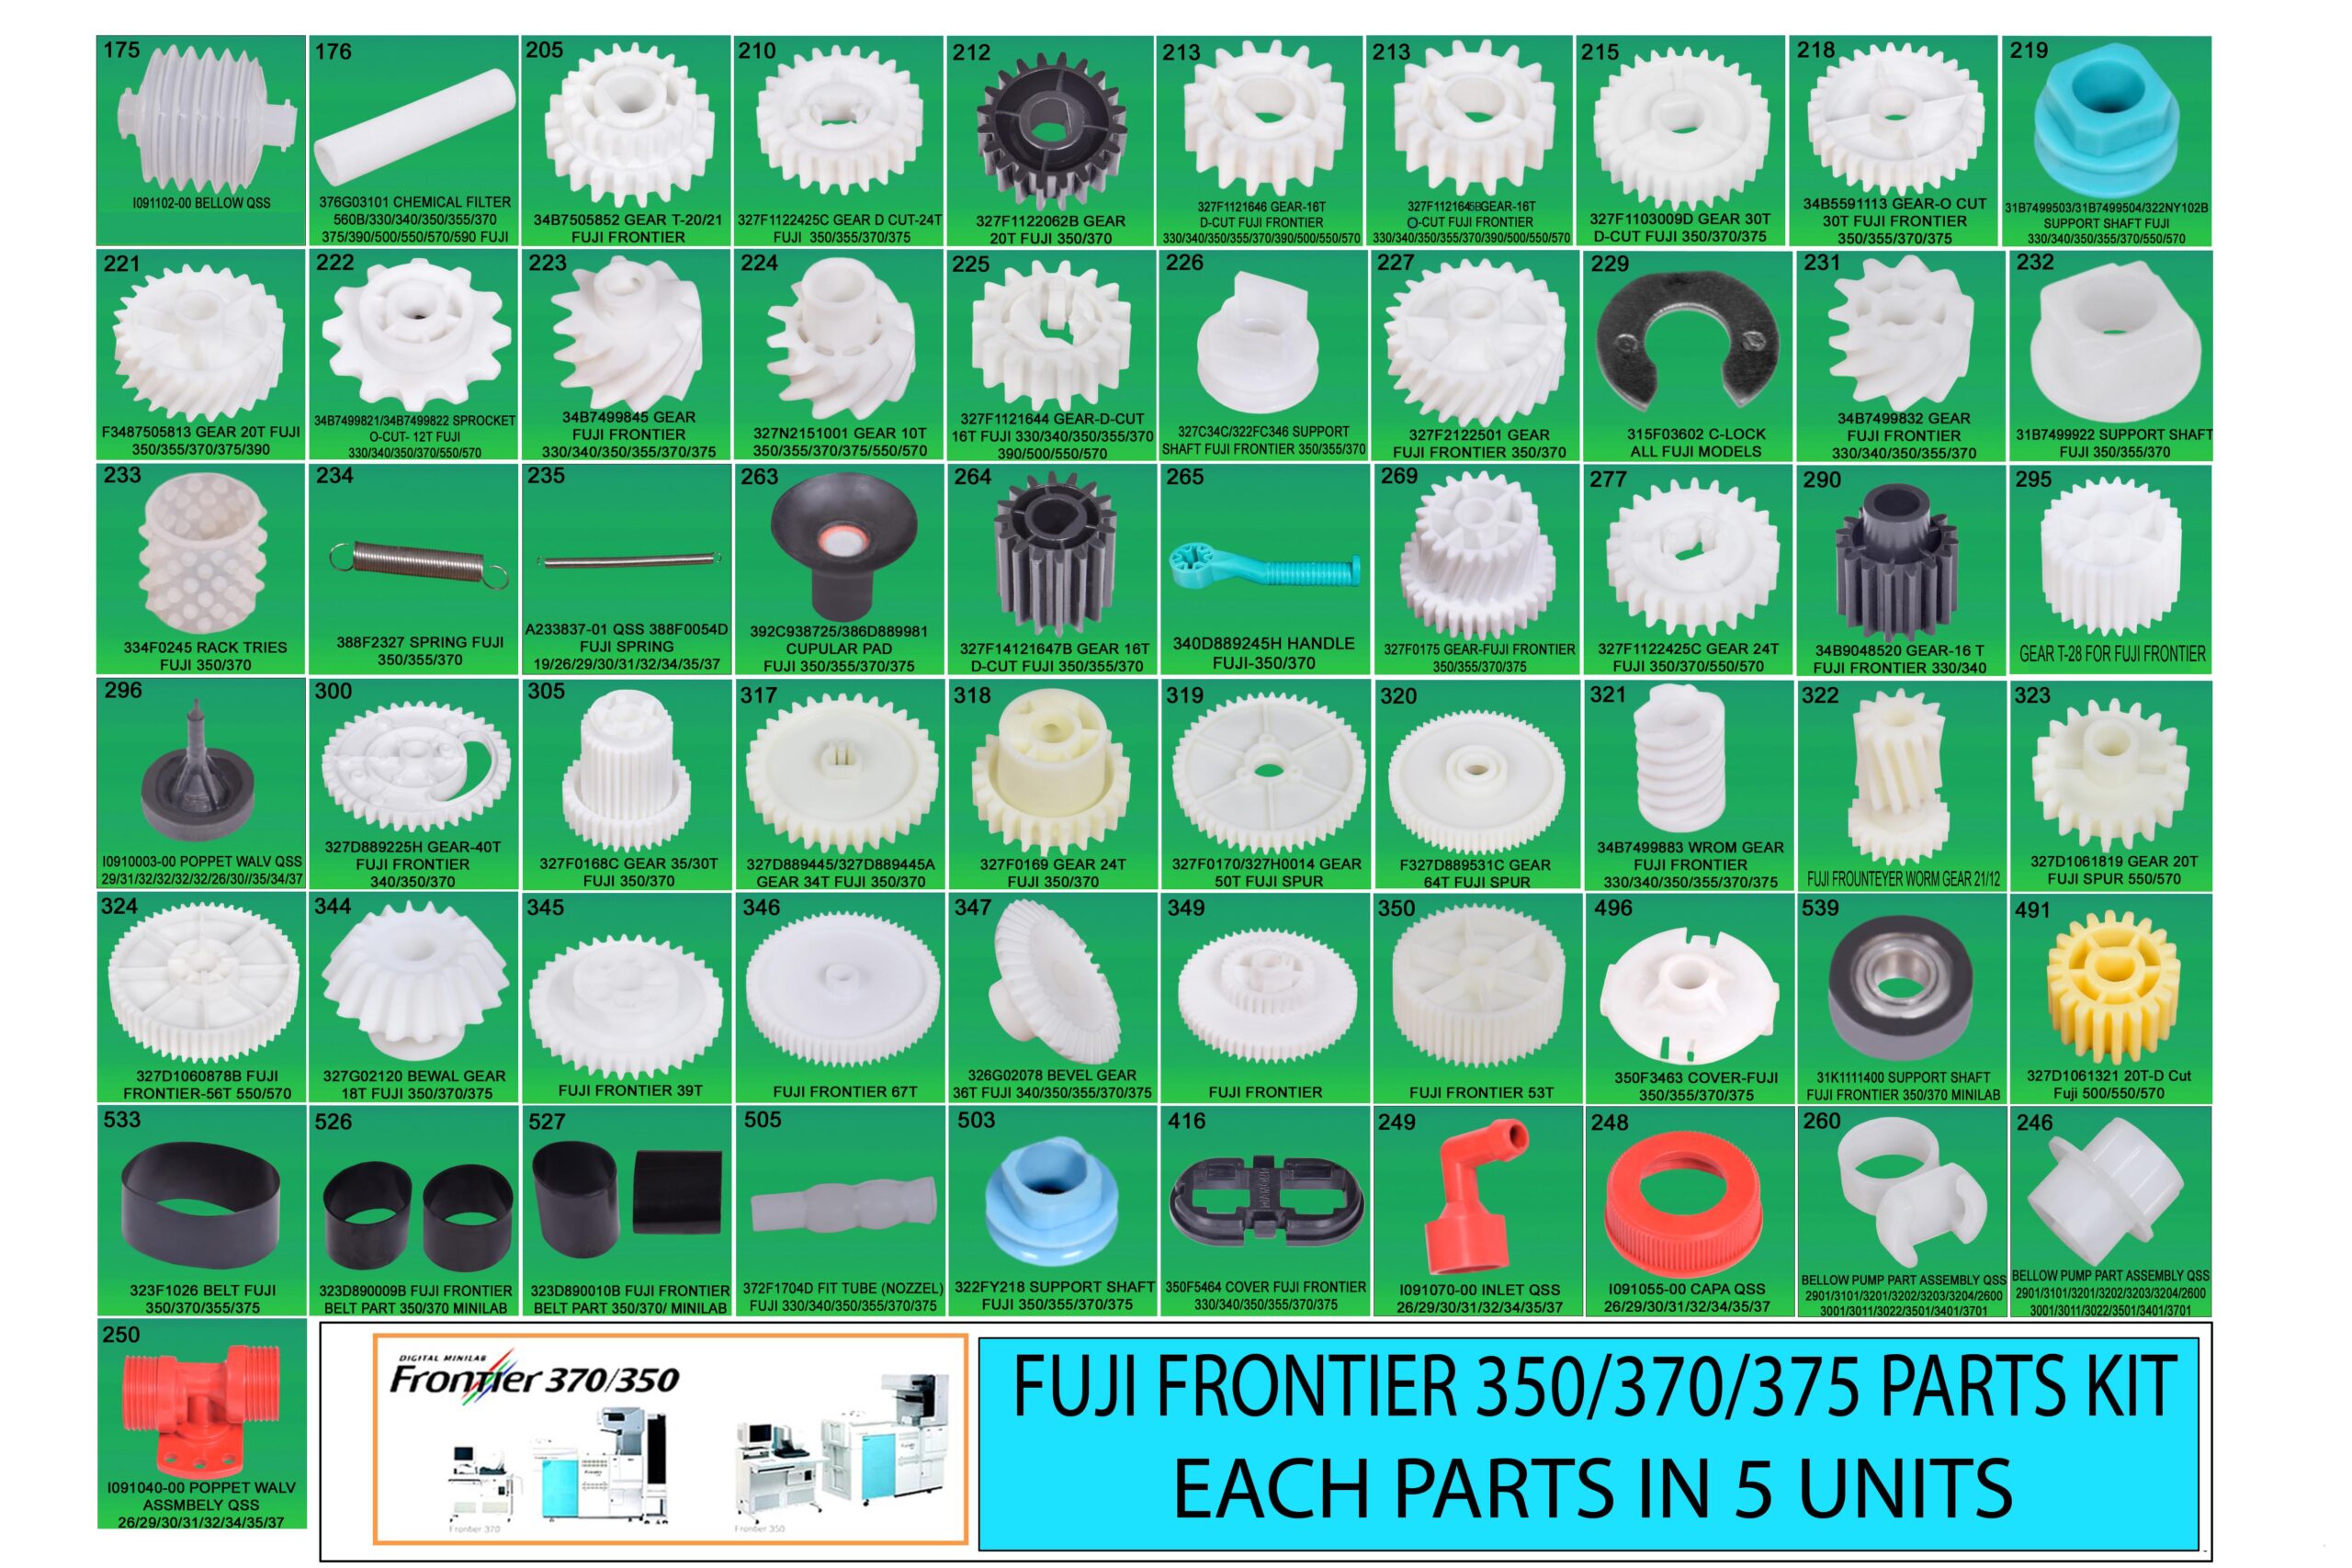 Fuji Frontier 350-370-375 Spear Parts Kit